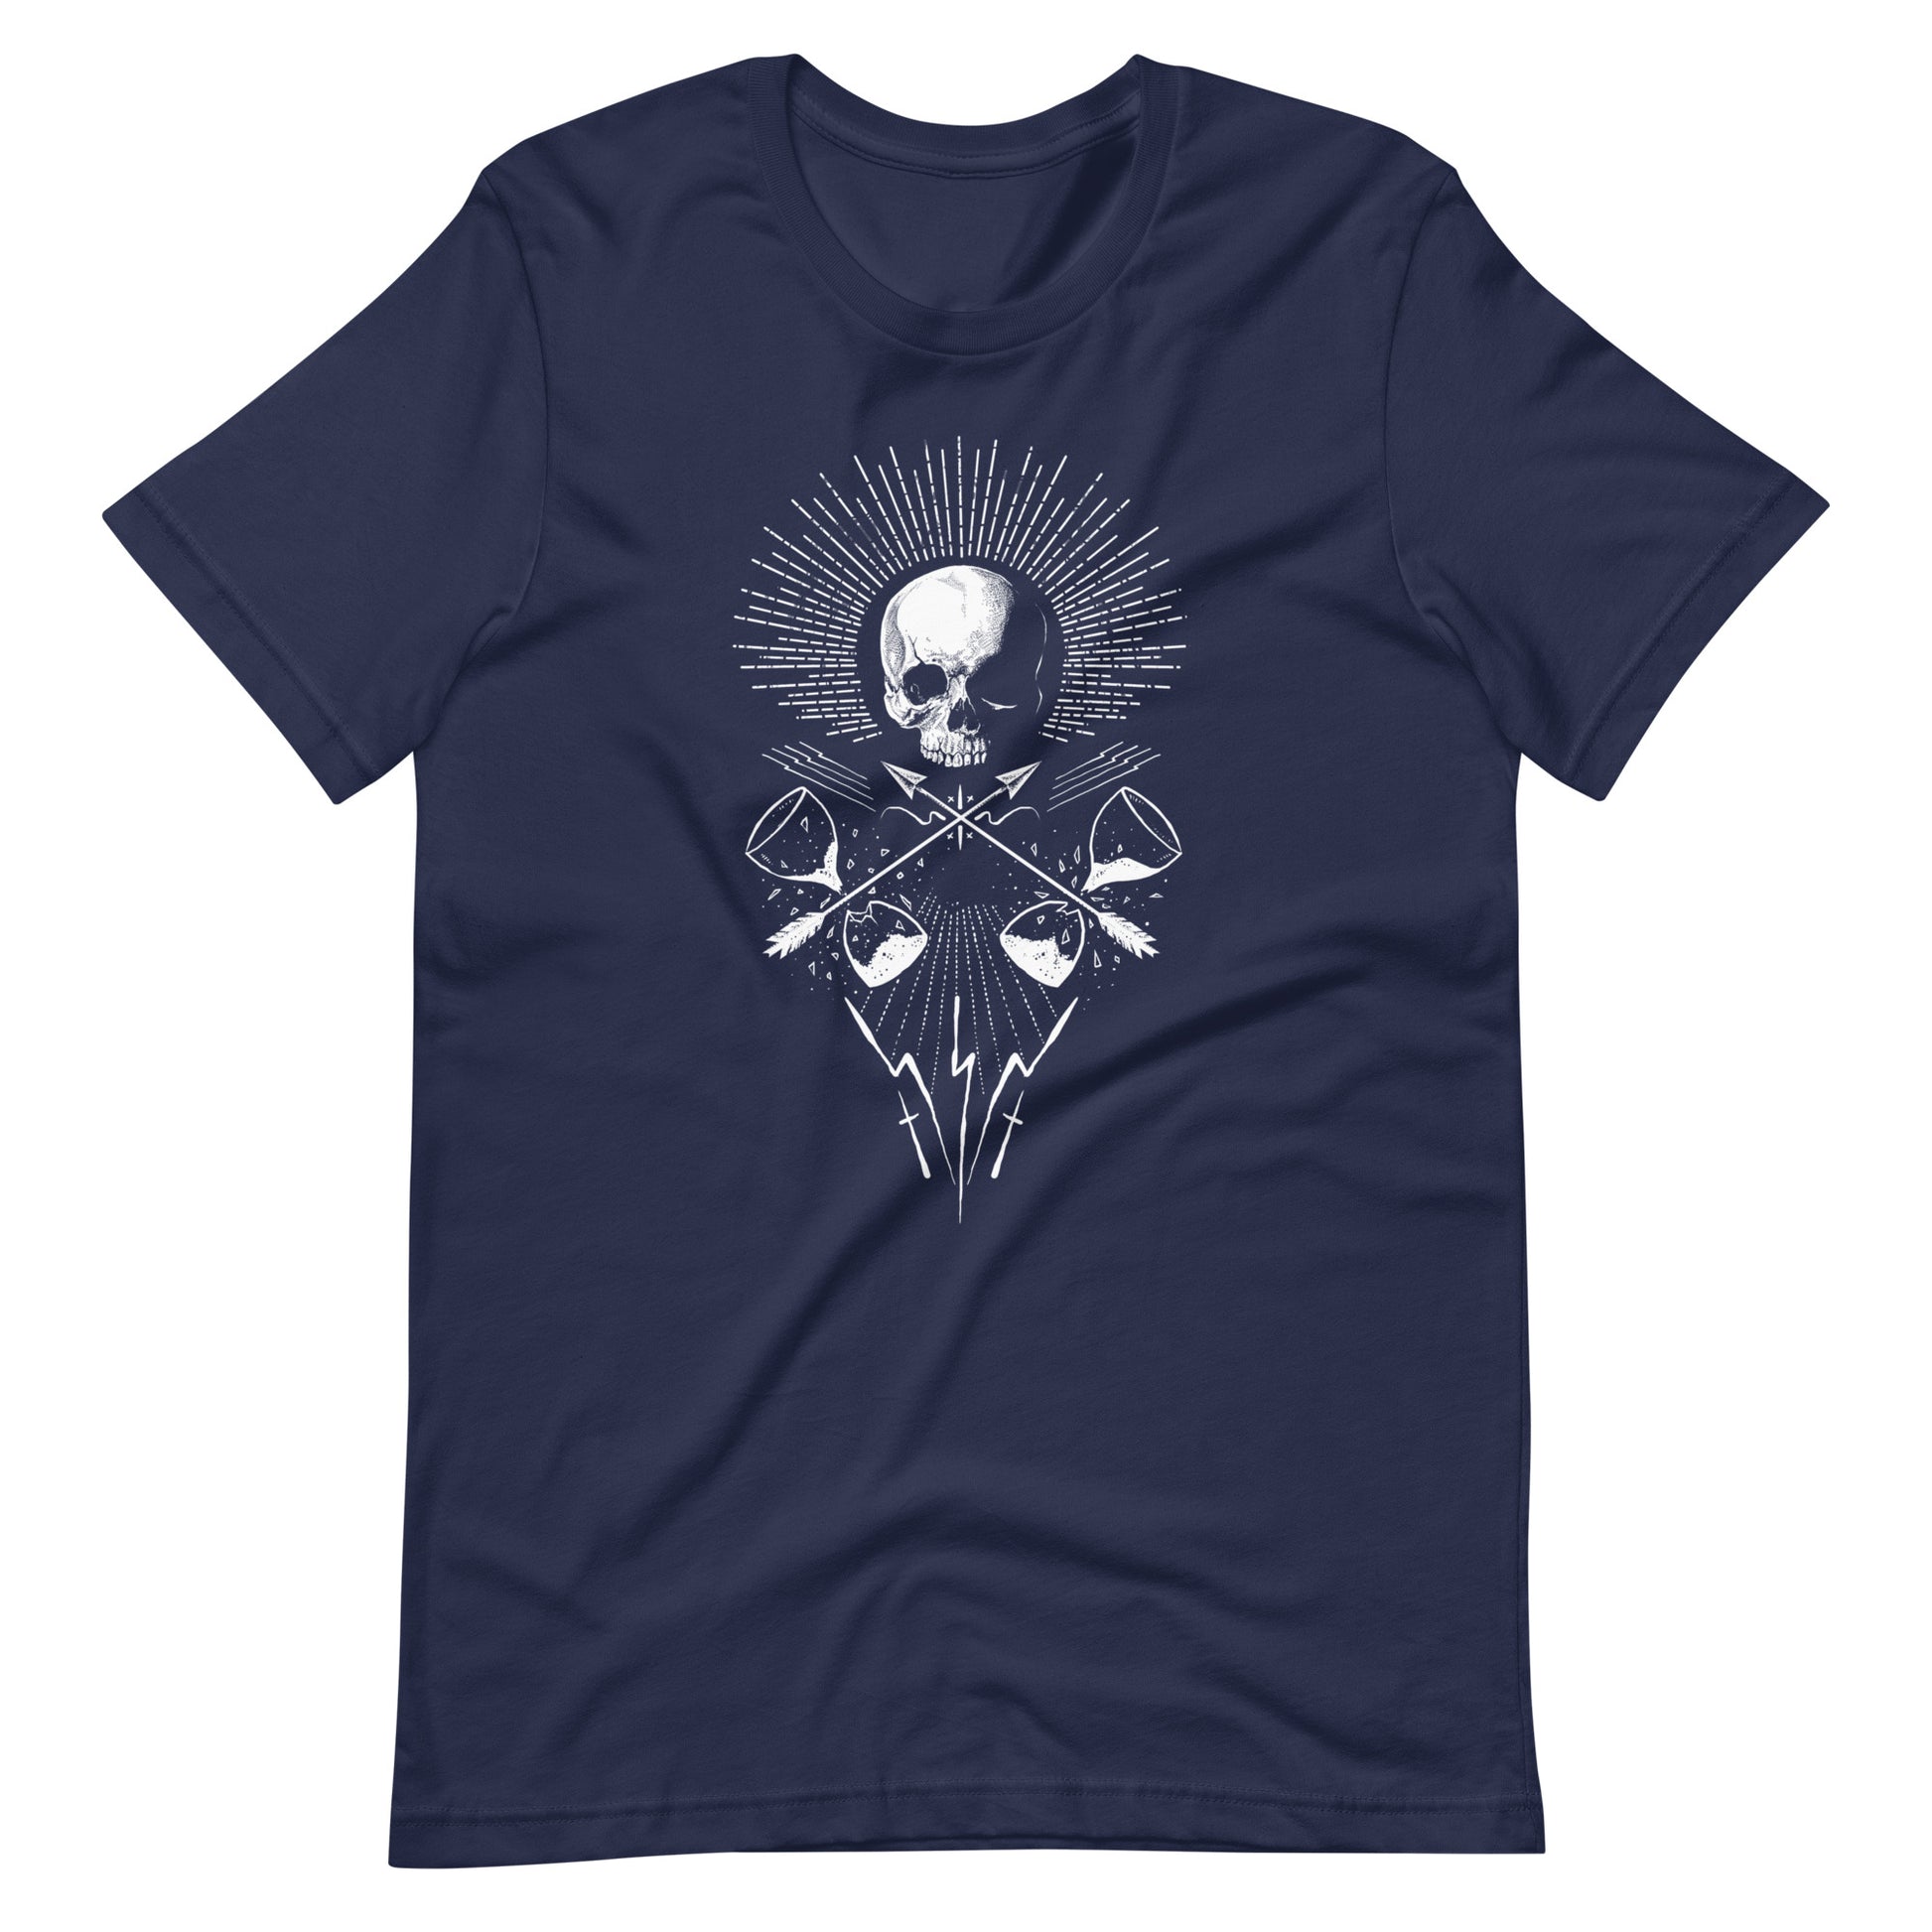 For the Sake of Future - Men's t-shirt - Navy Front